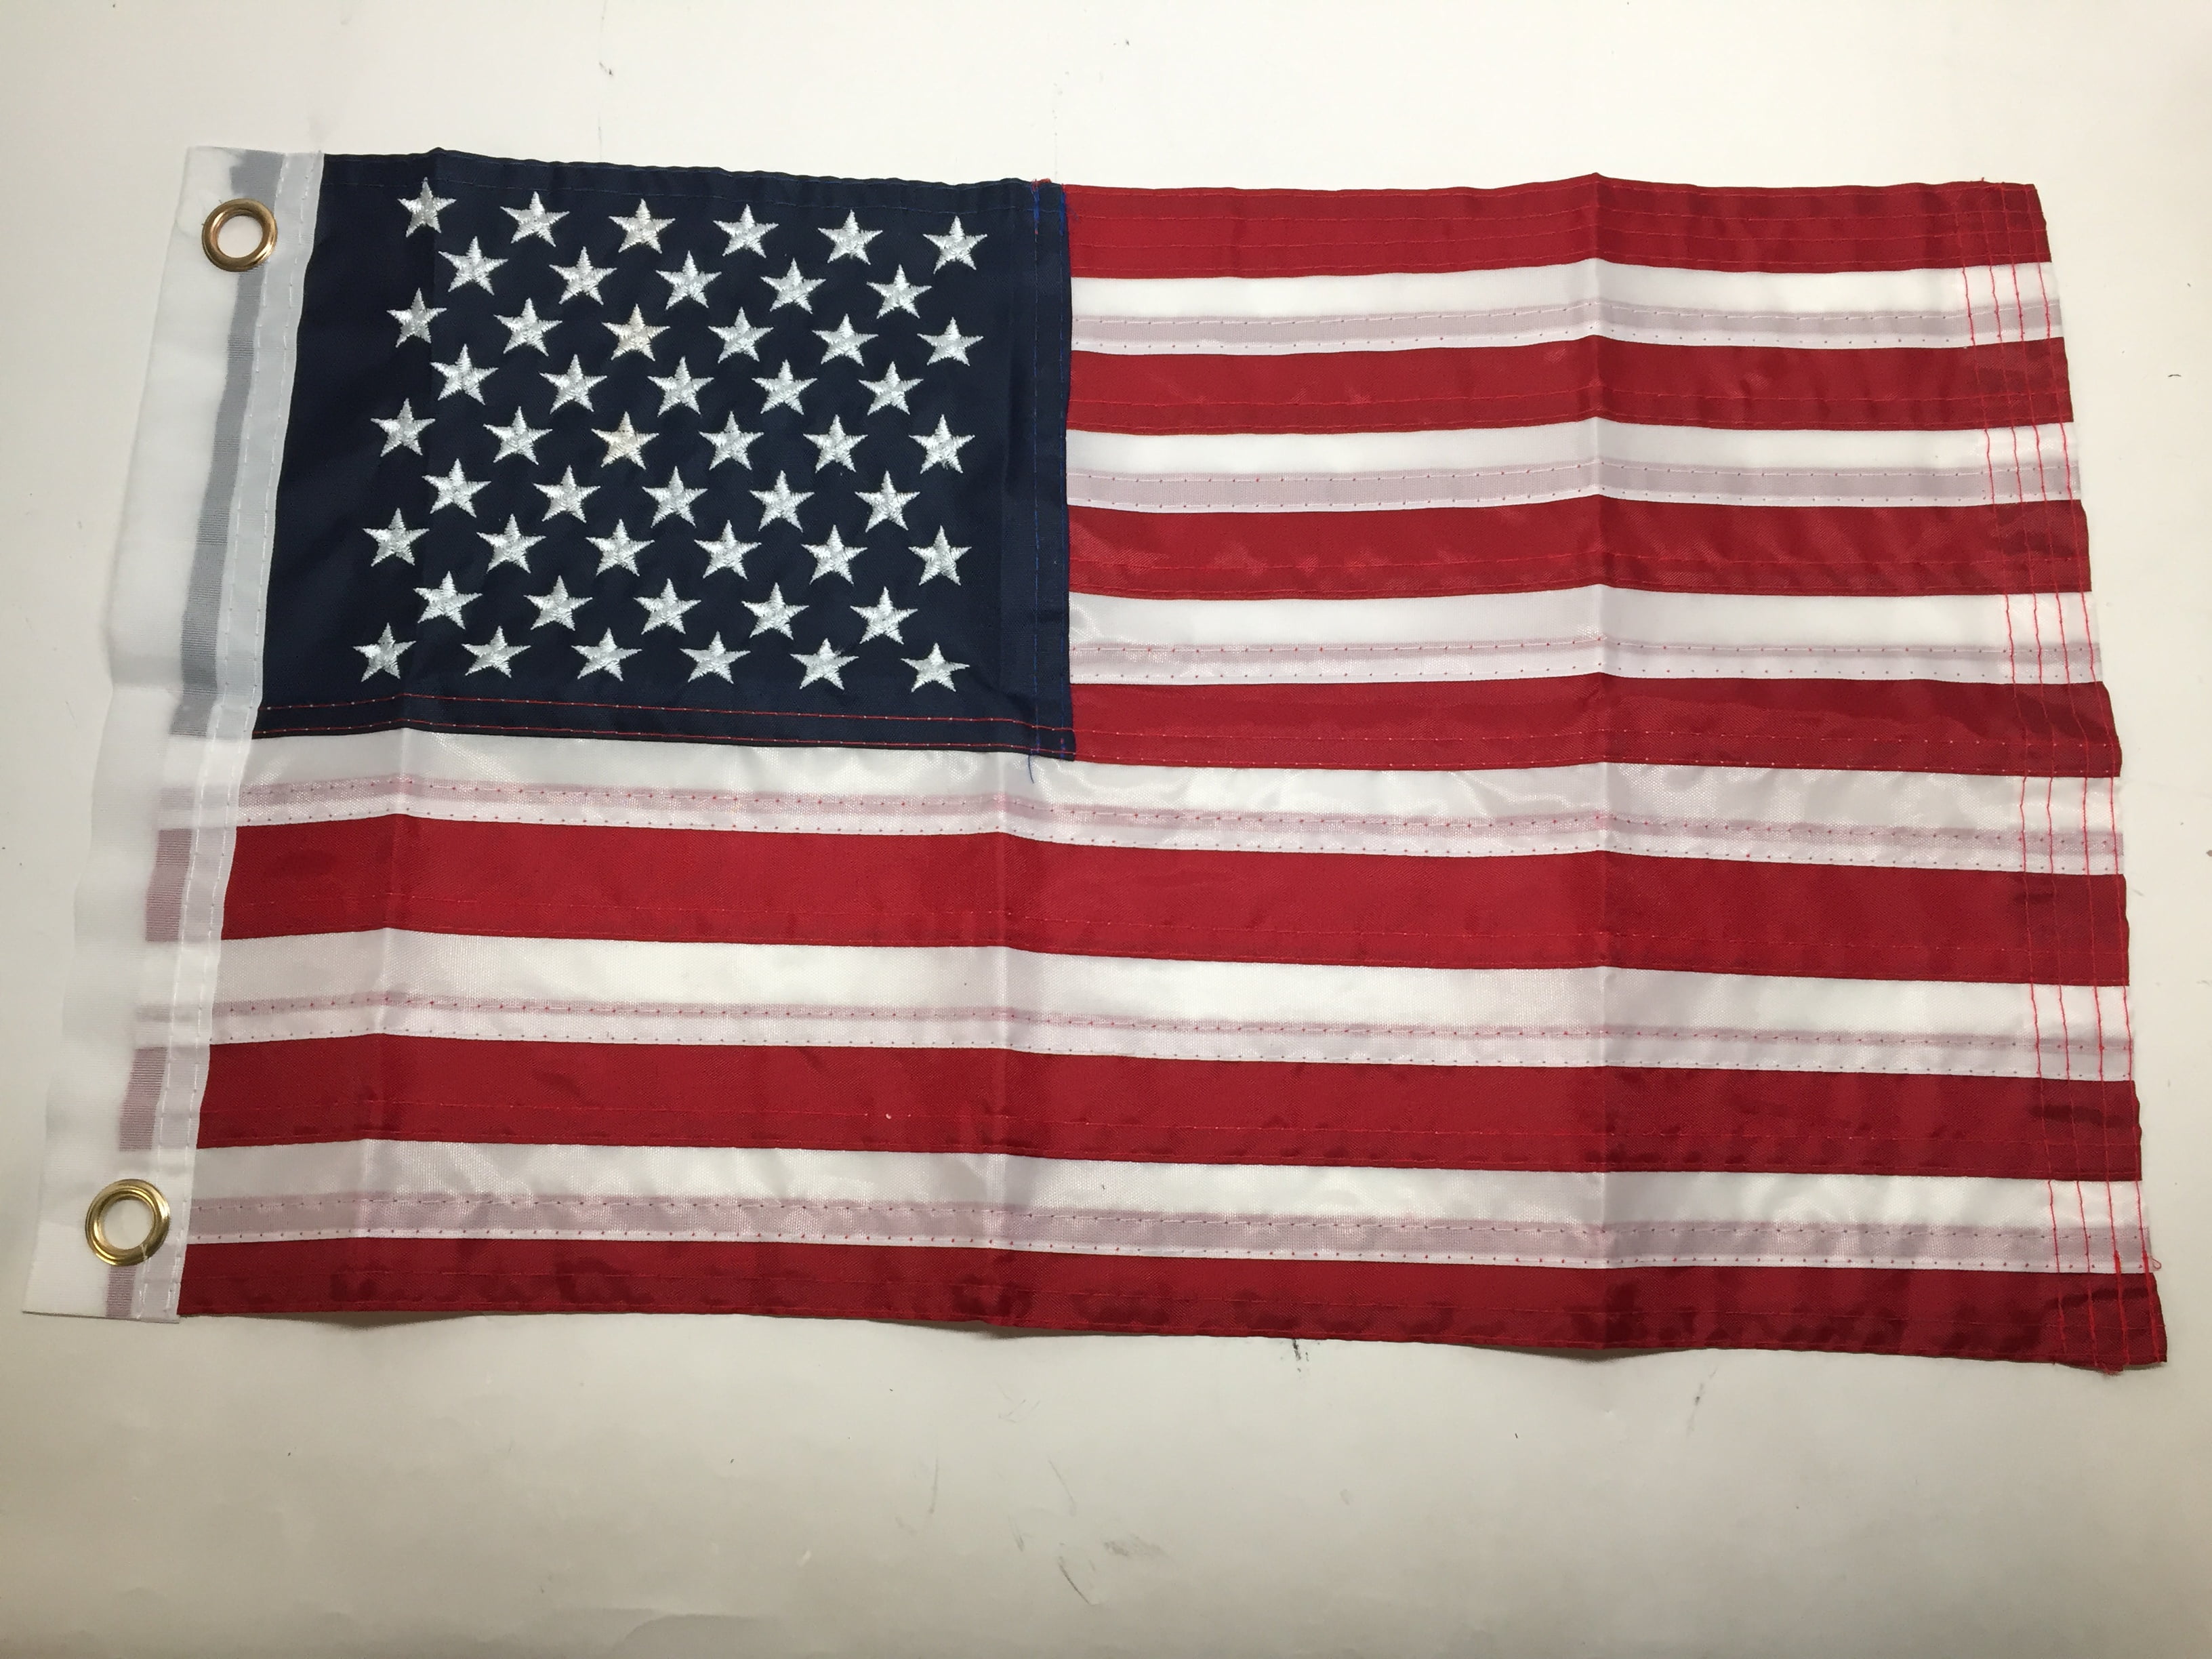 American Flag 3'x5' FT USA US U.S Printed Stripes With Stars Brass Grommets 